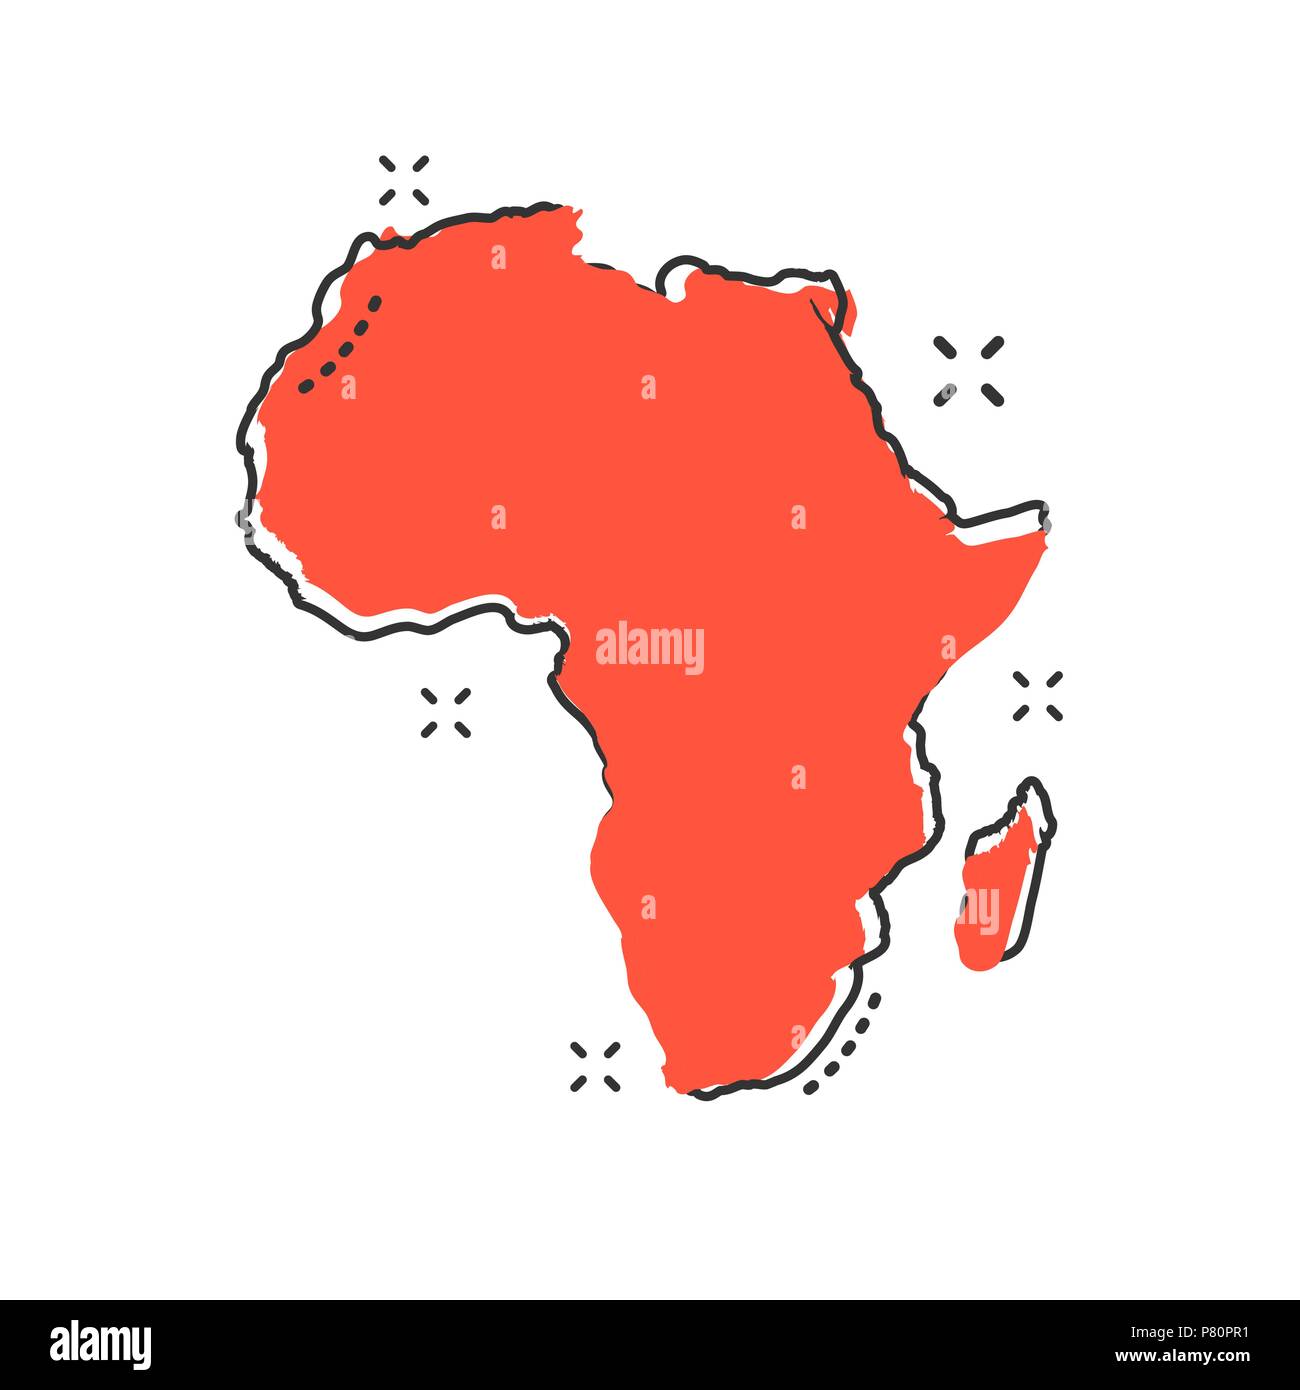 Cartoon Africa map icon in comic style. Africa illustration pictogram. Country geography sign splash business concept. Stock Vector